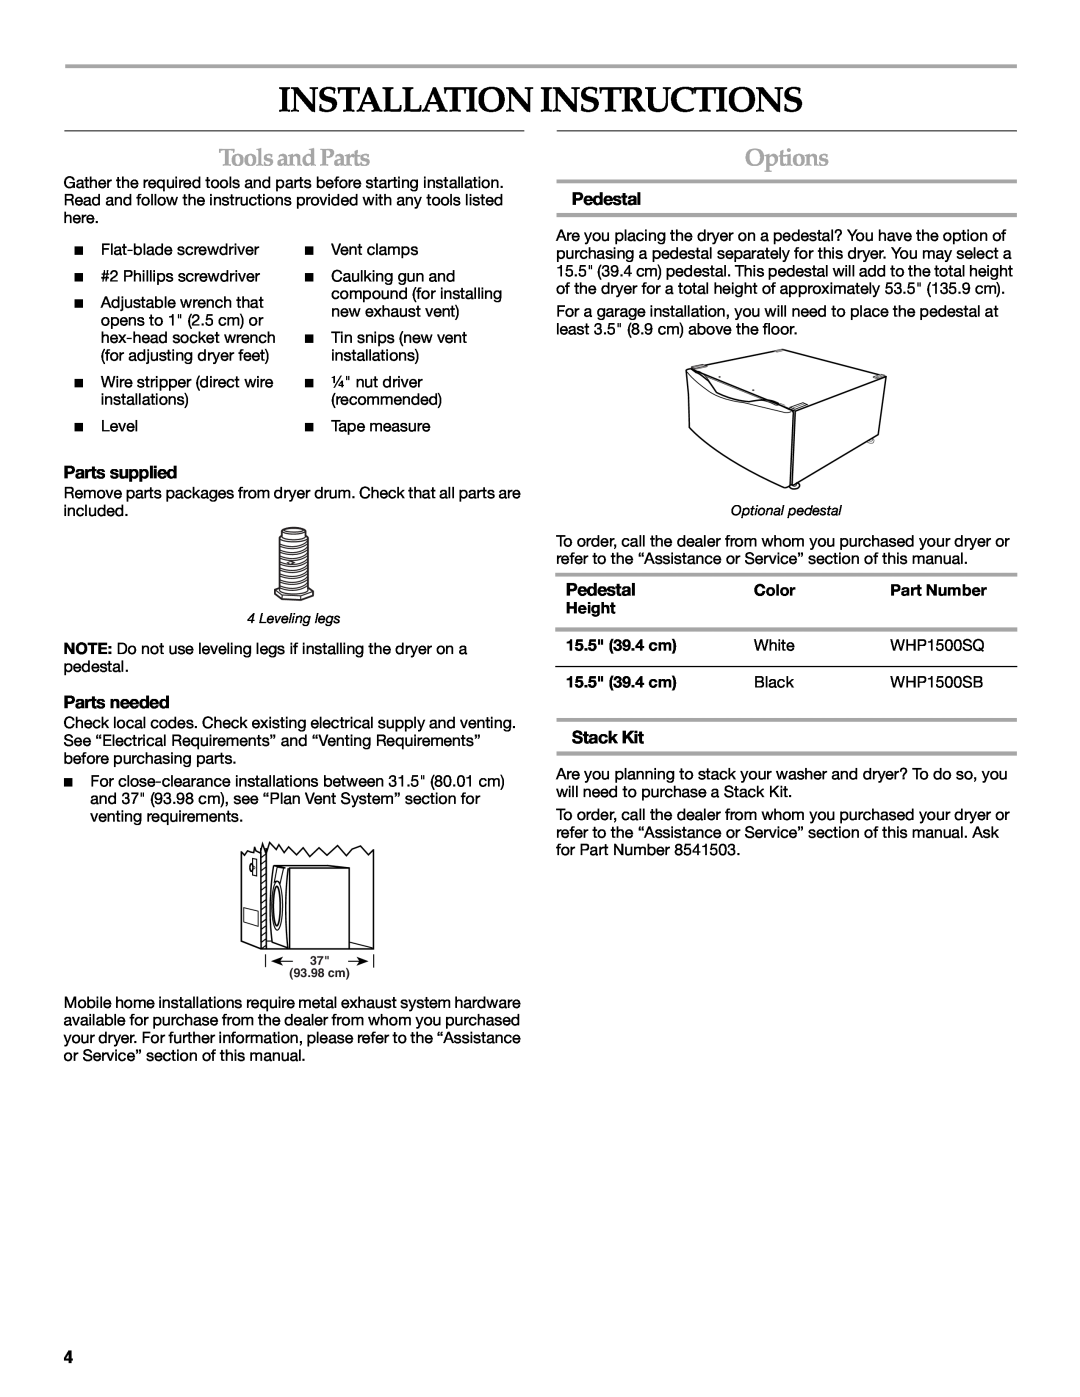 Maytag W10099070 Installation Instructions, Toolsand Parts, Options, Pedestal, Parts supplied, Parts needed, Stack Kit 